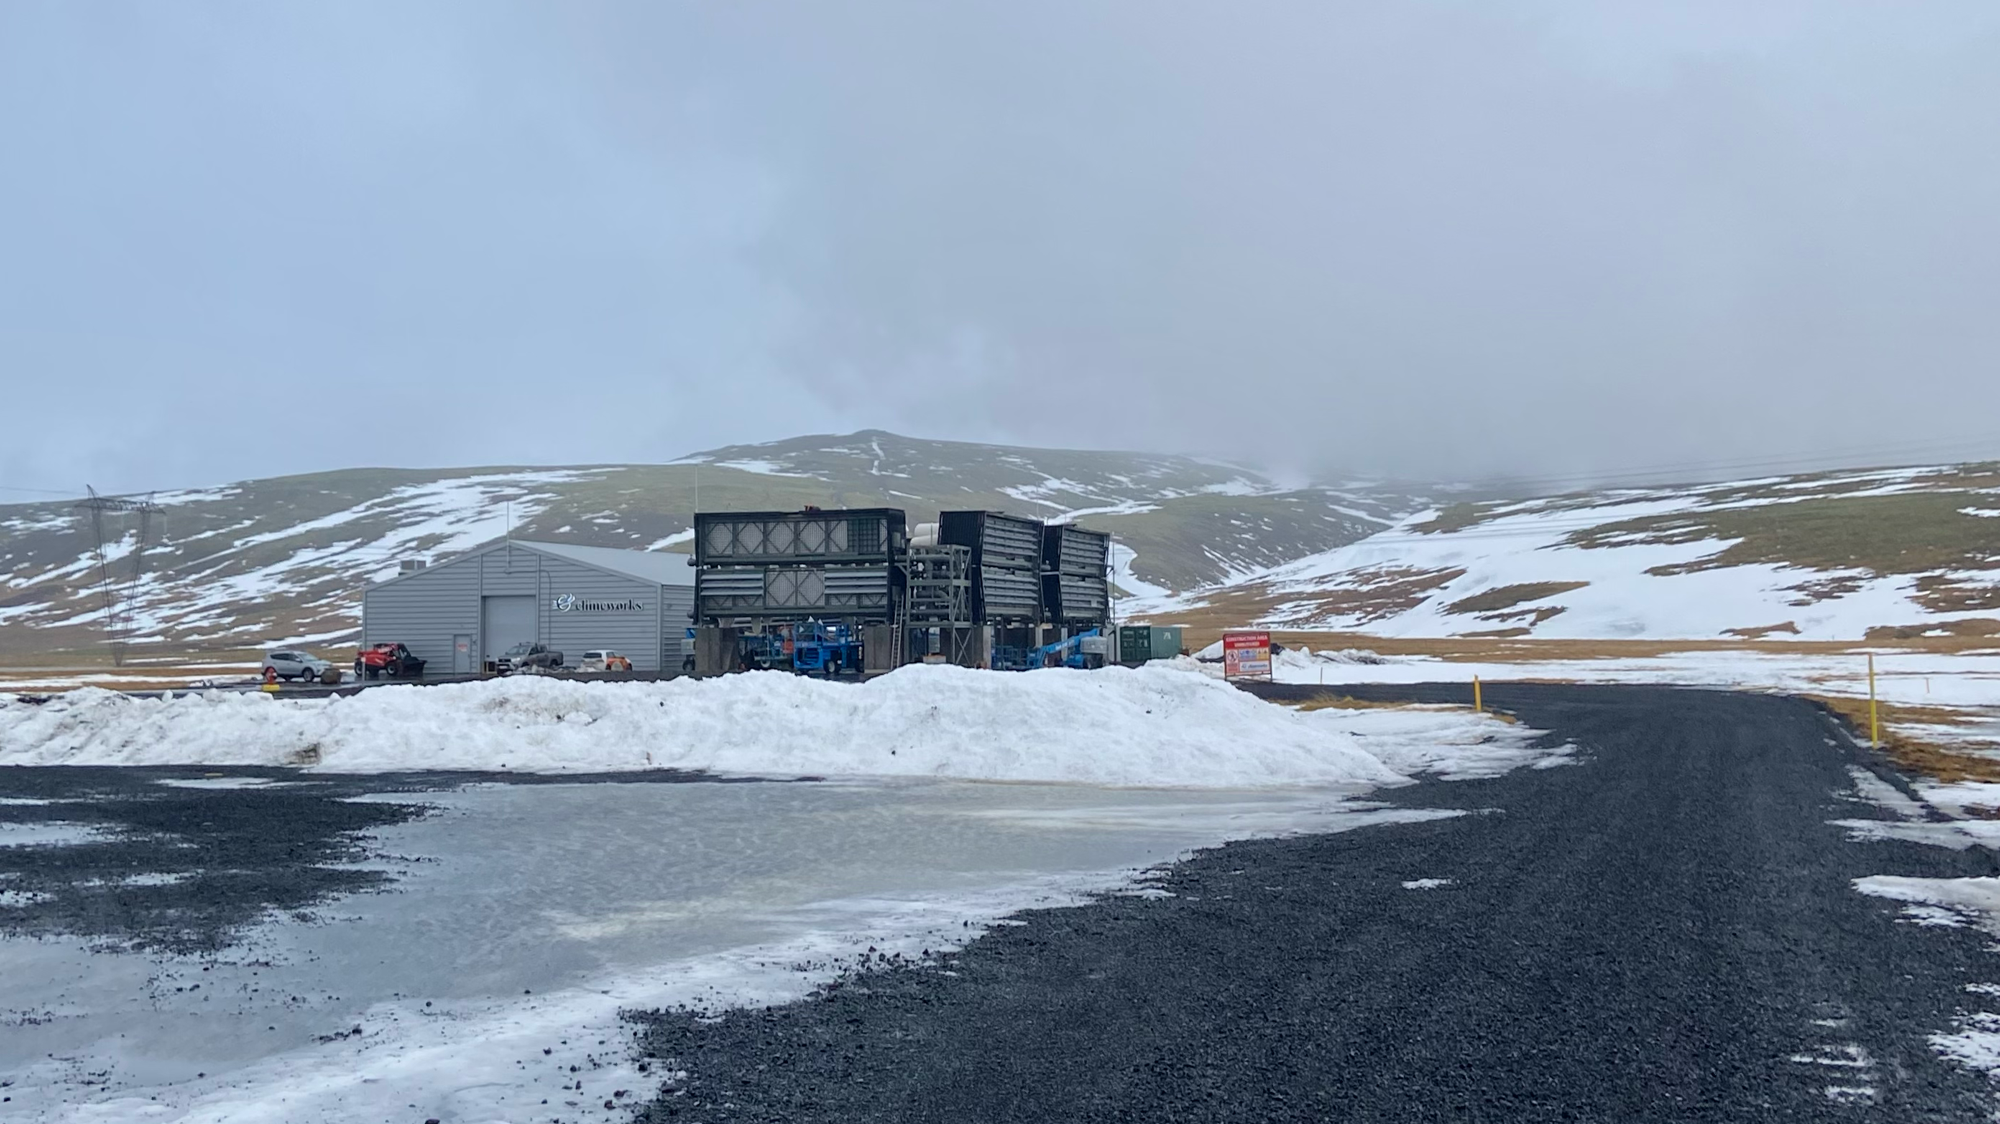 Photograph of a black unmade road leading to a large industrial-looking shed and equipment, with a few vehicles parked outside, in a deserted, partially snowy landscape with hills in the background.